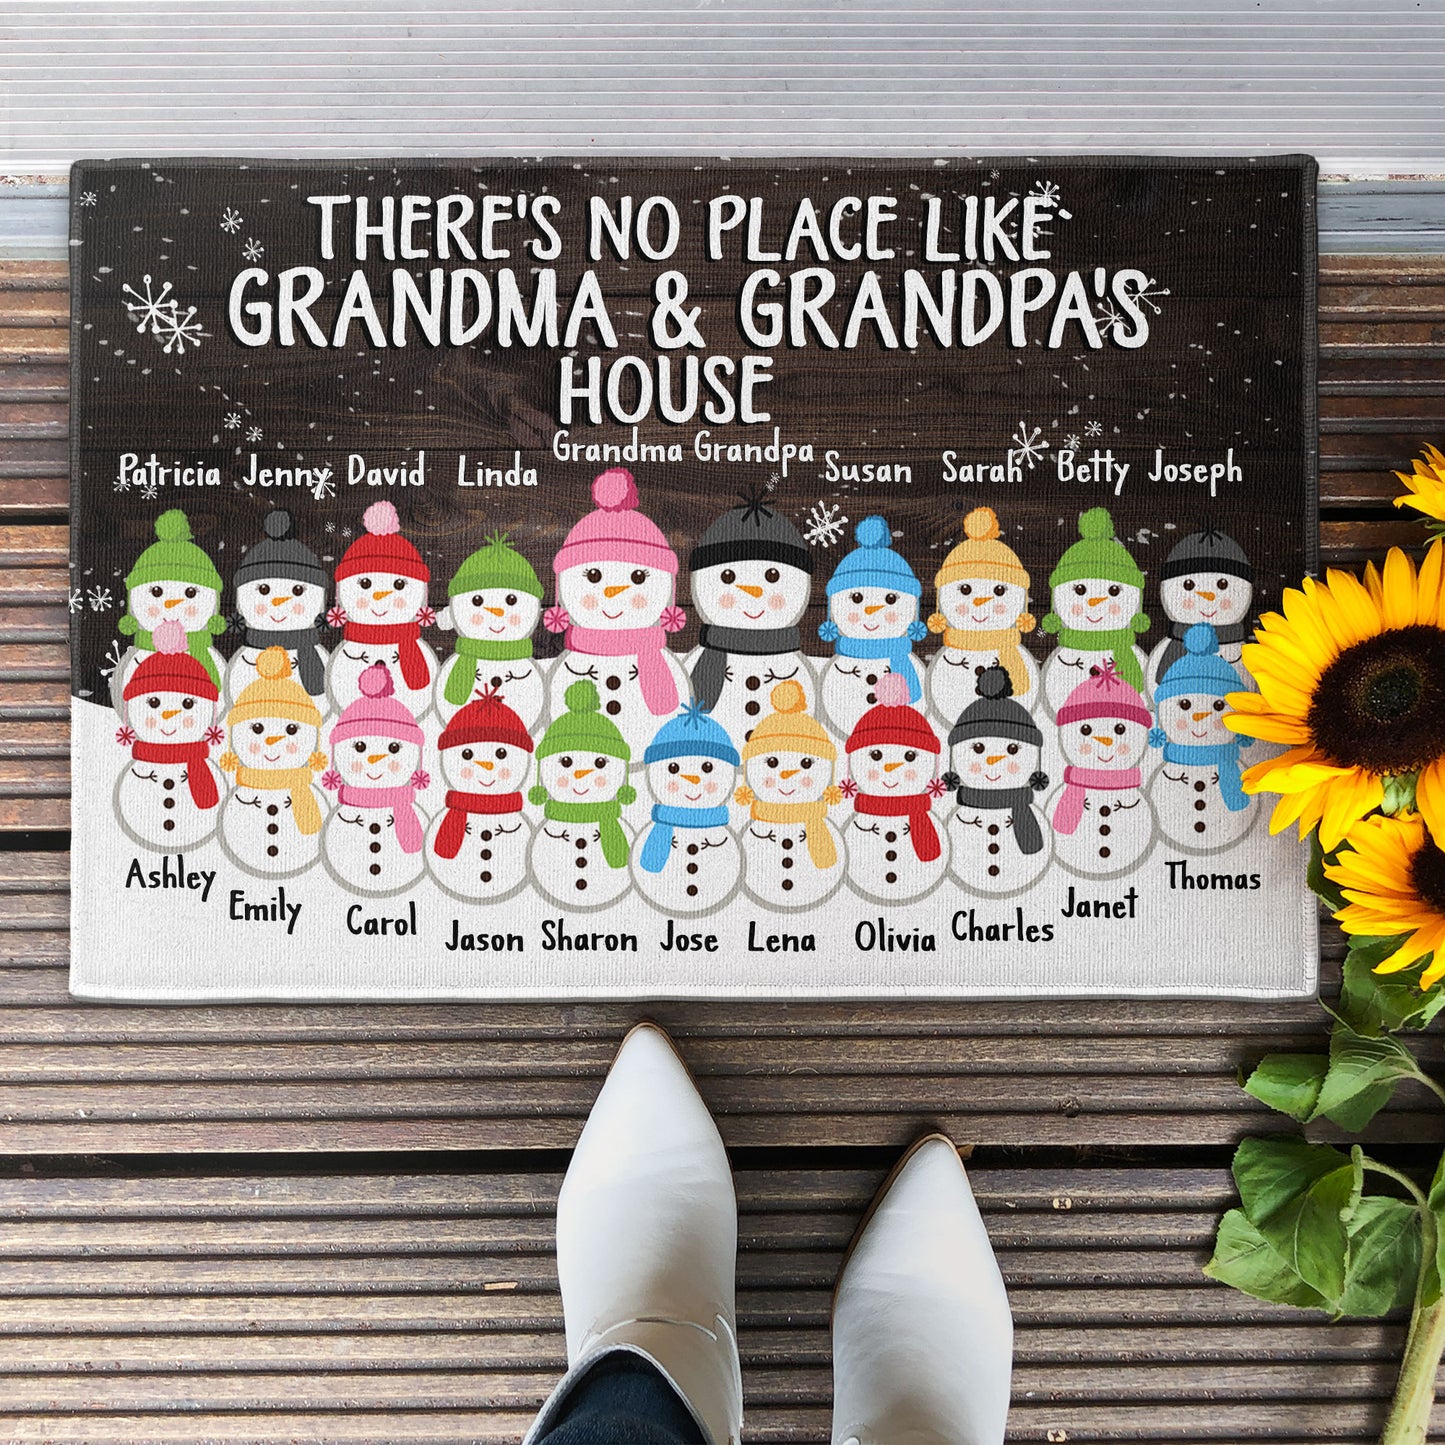 There's Snow Place Like Grandma & Grandpa's House - Personalized Doormat - Snowman Family